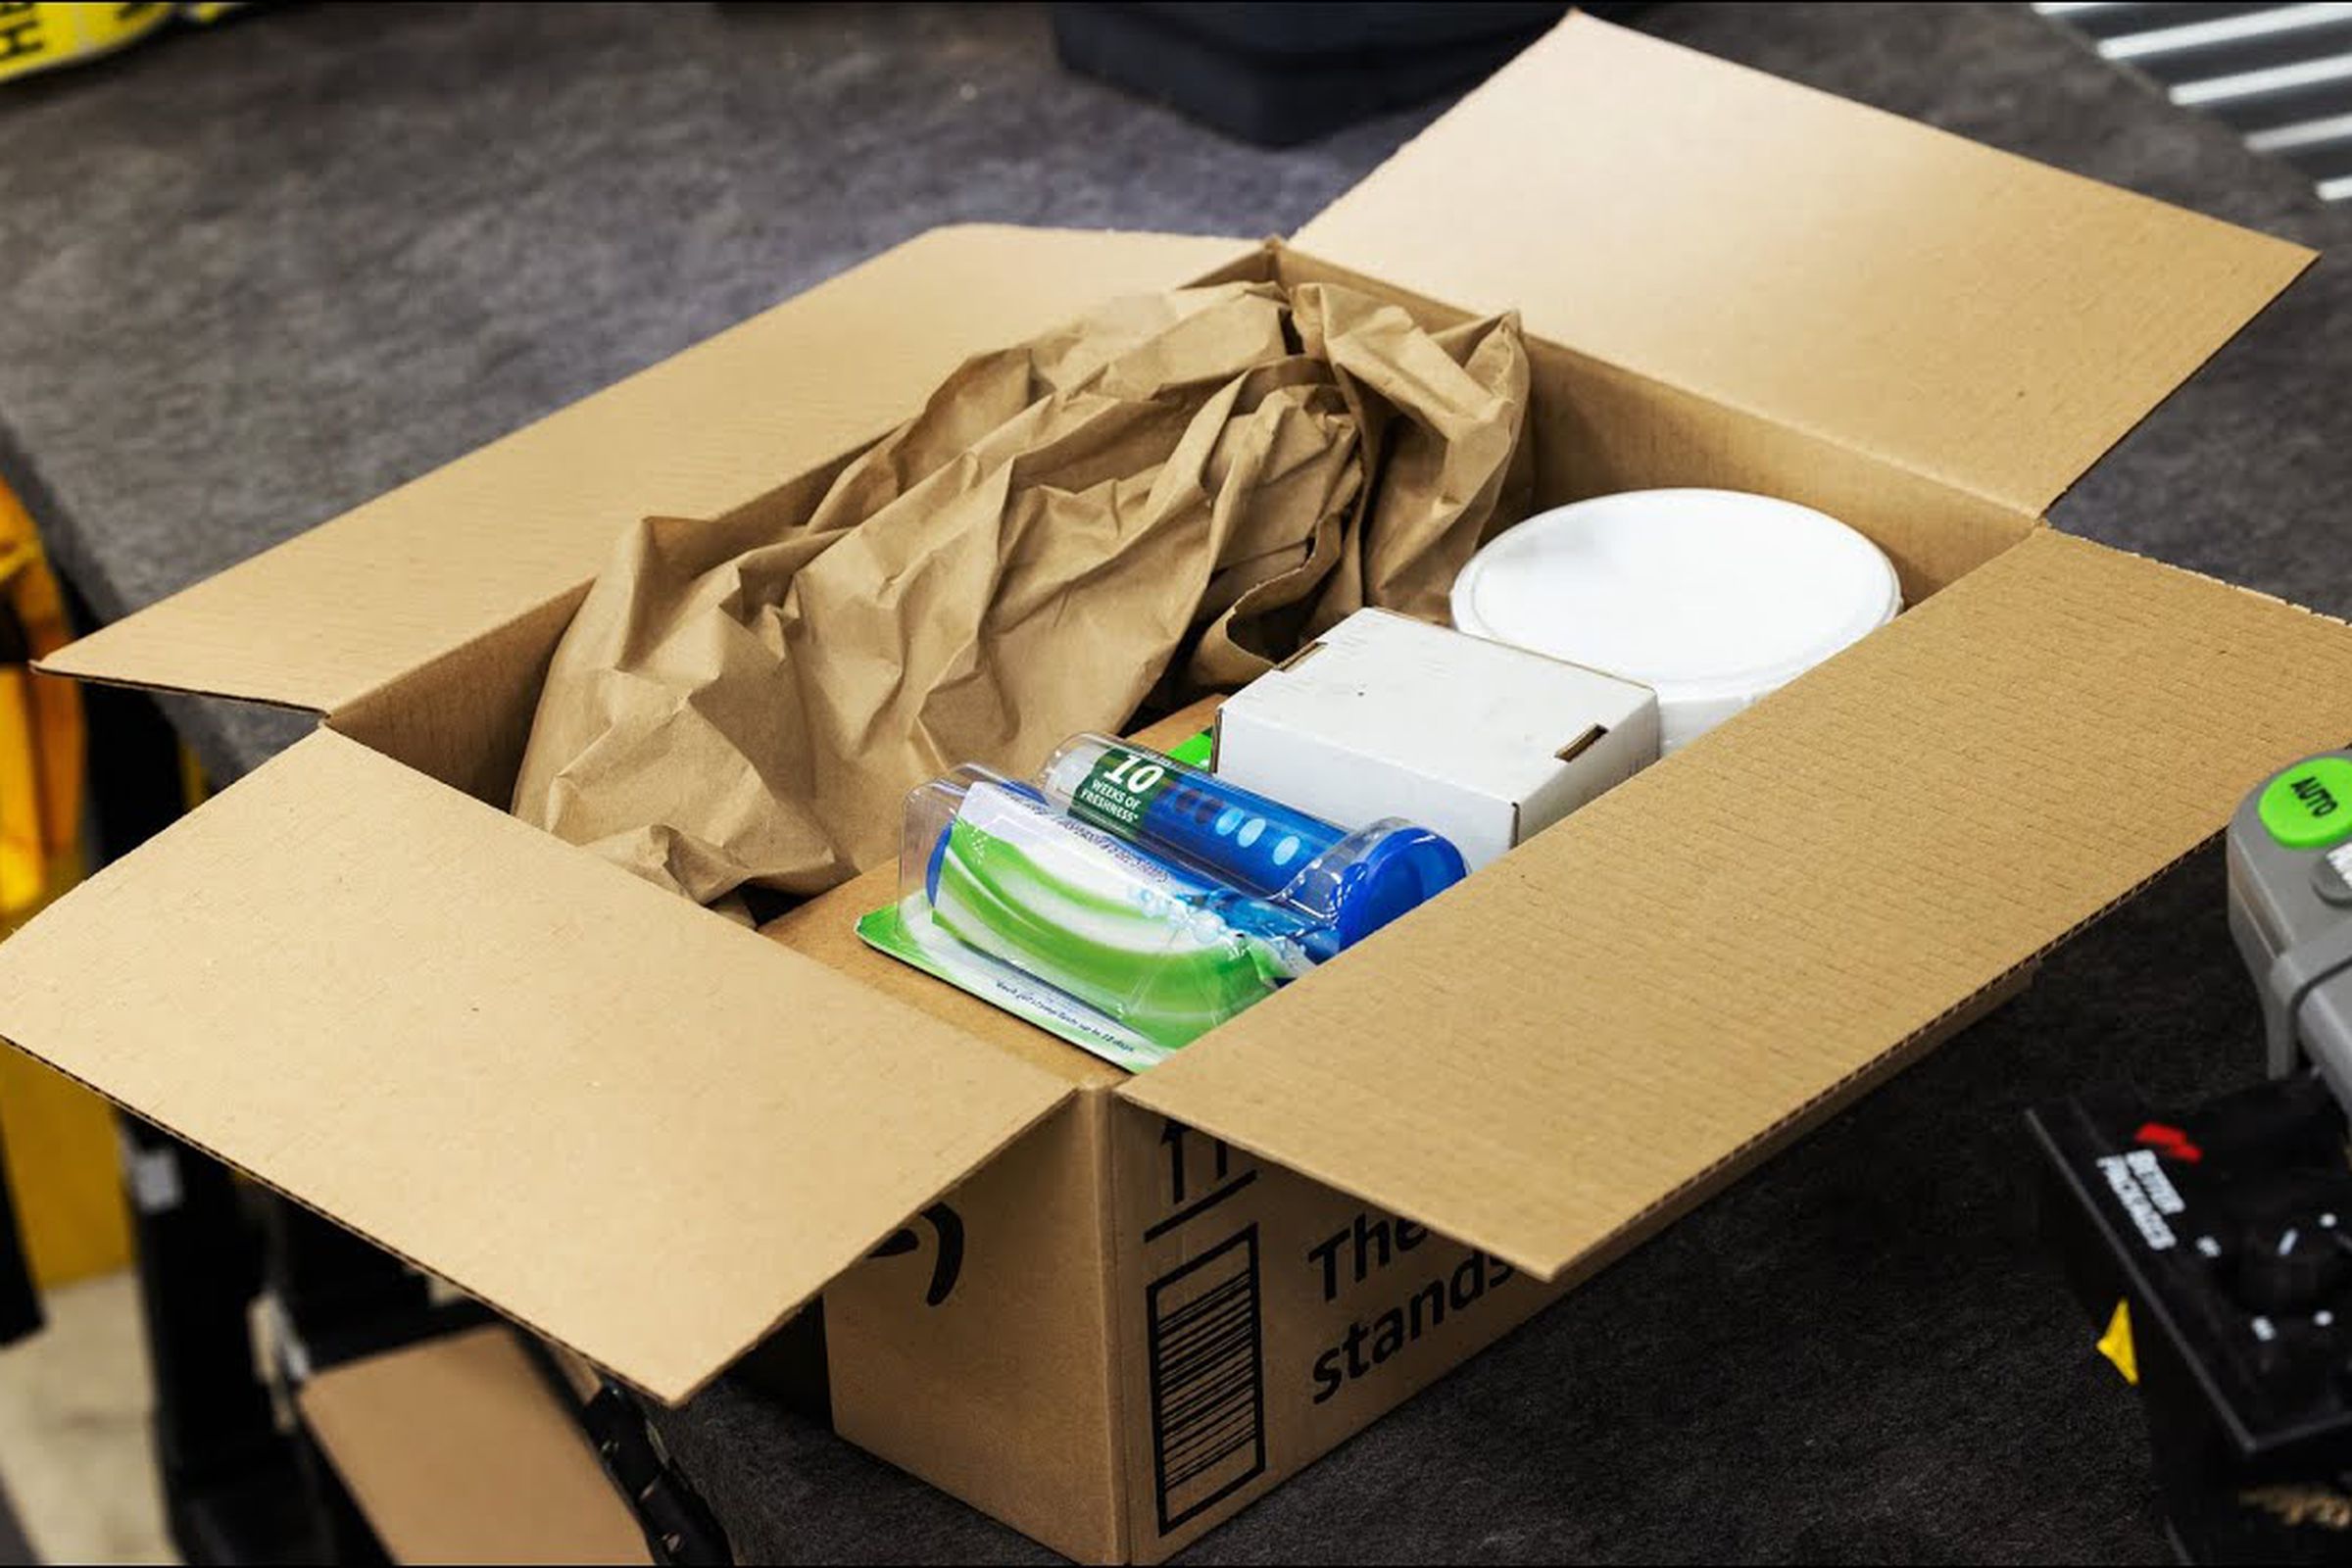 An image showing paper filler inside an Amazon package